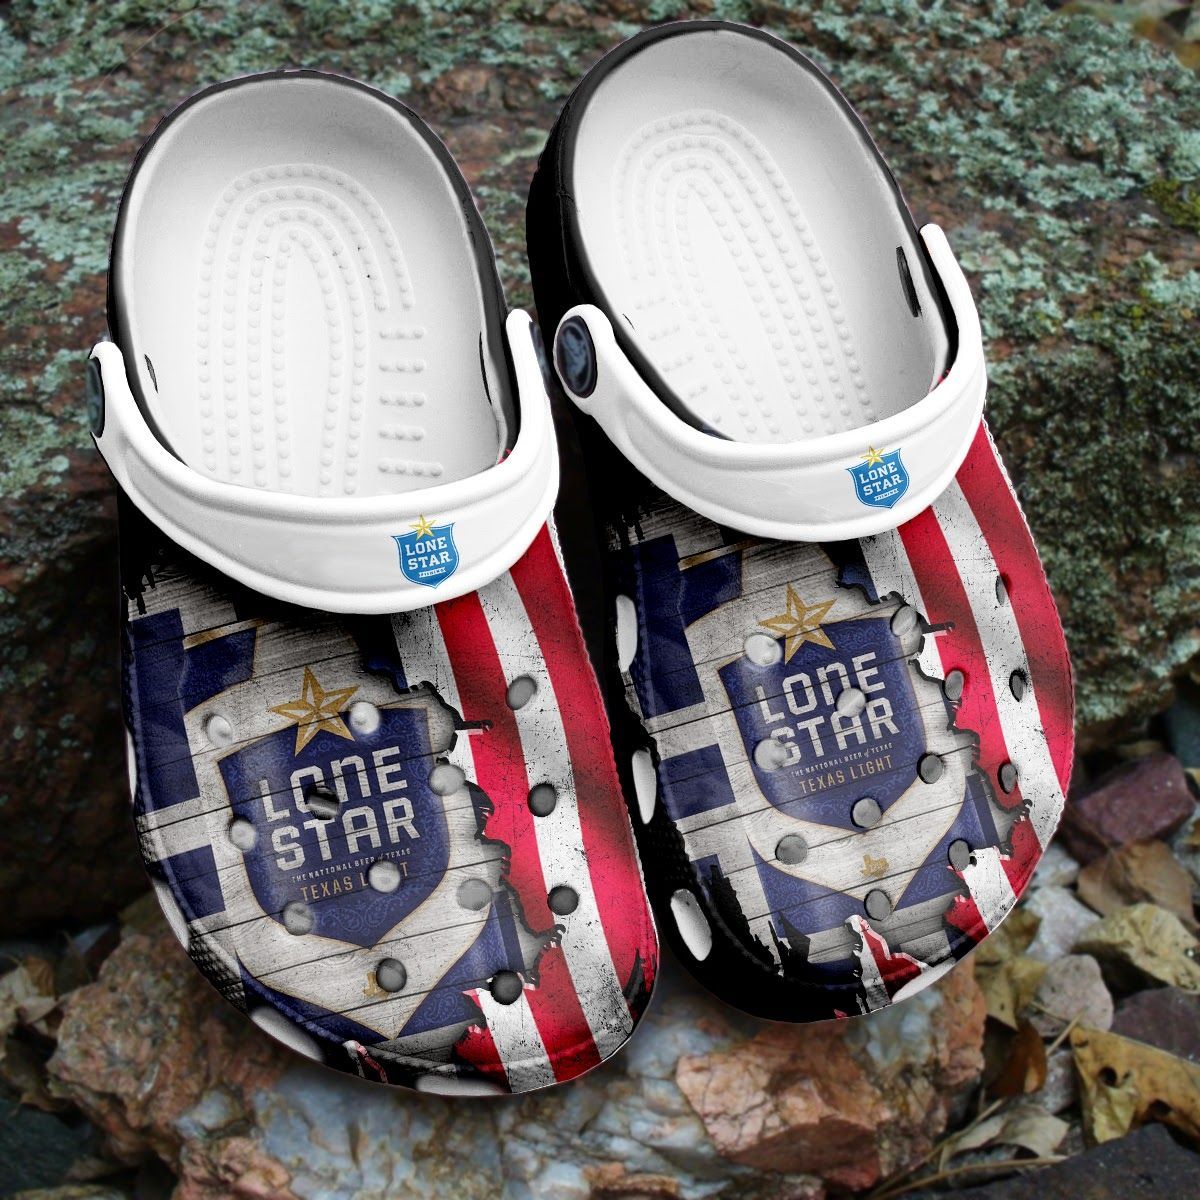 If you'd like to purchase a pair of Crocband Clogs, be sure to check out the official website. 105